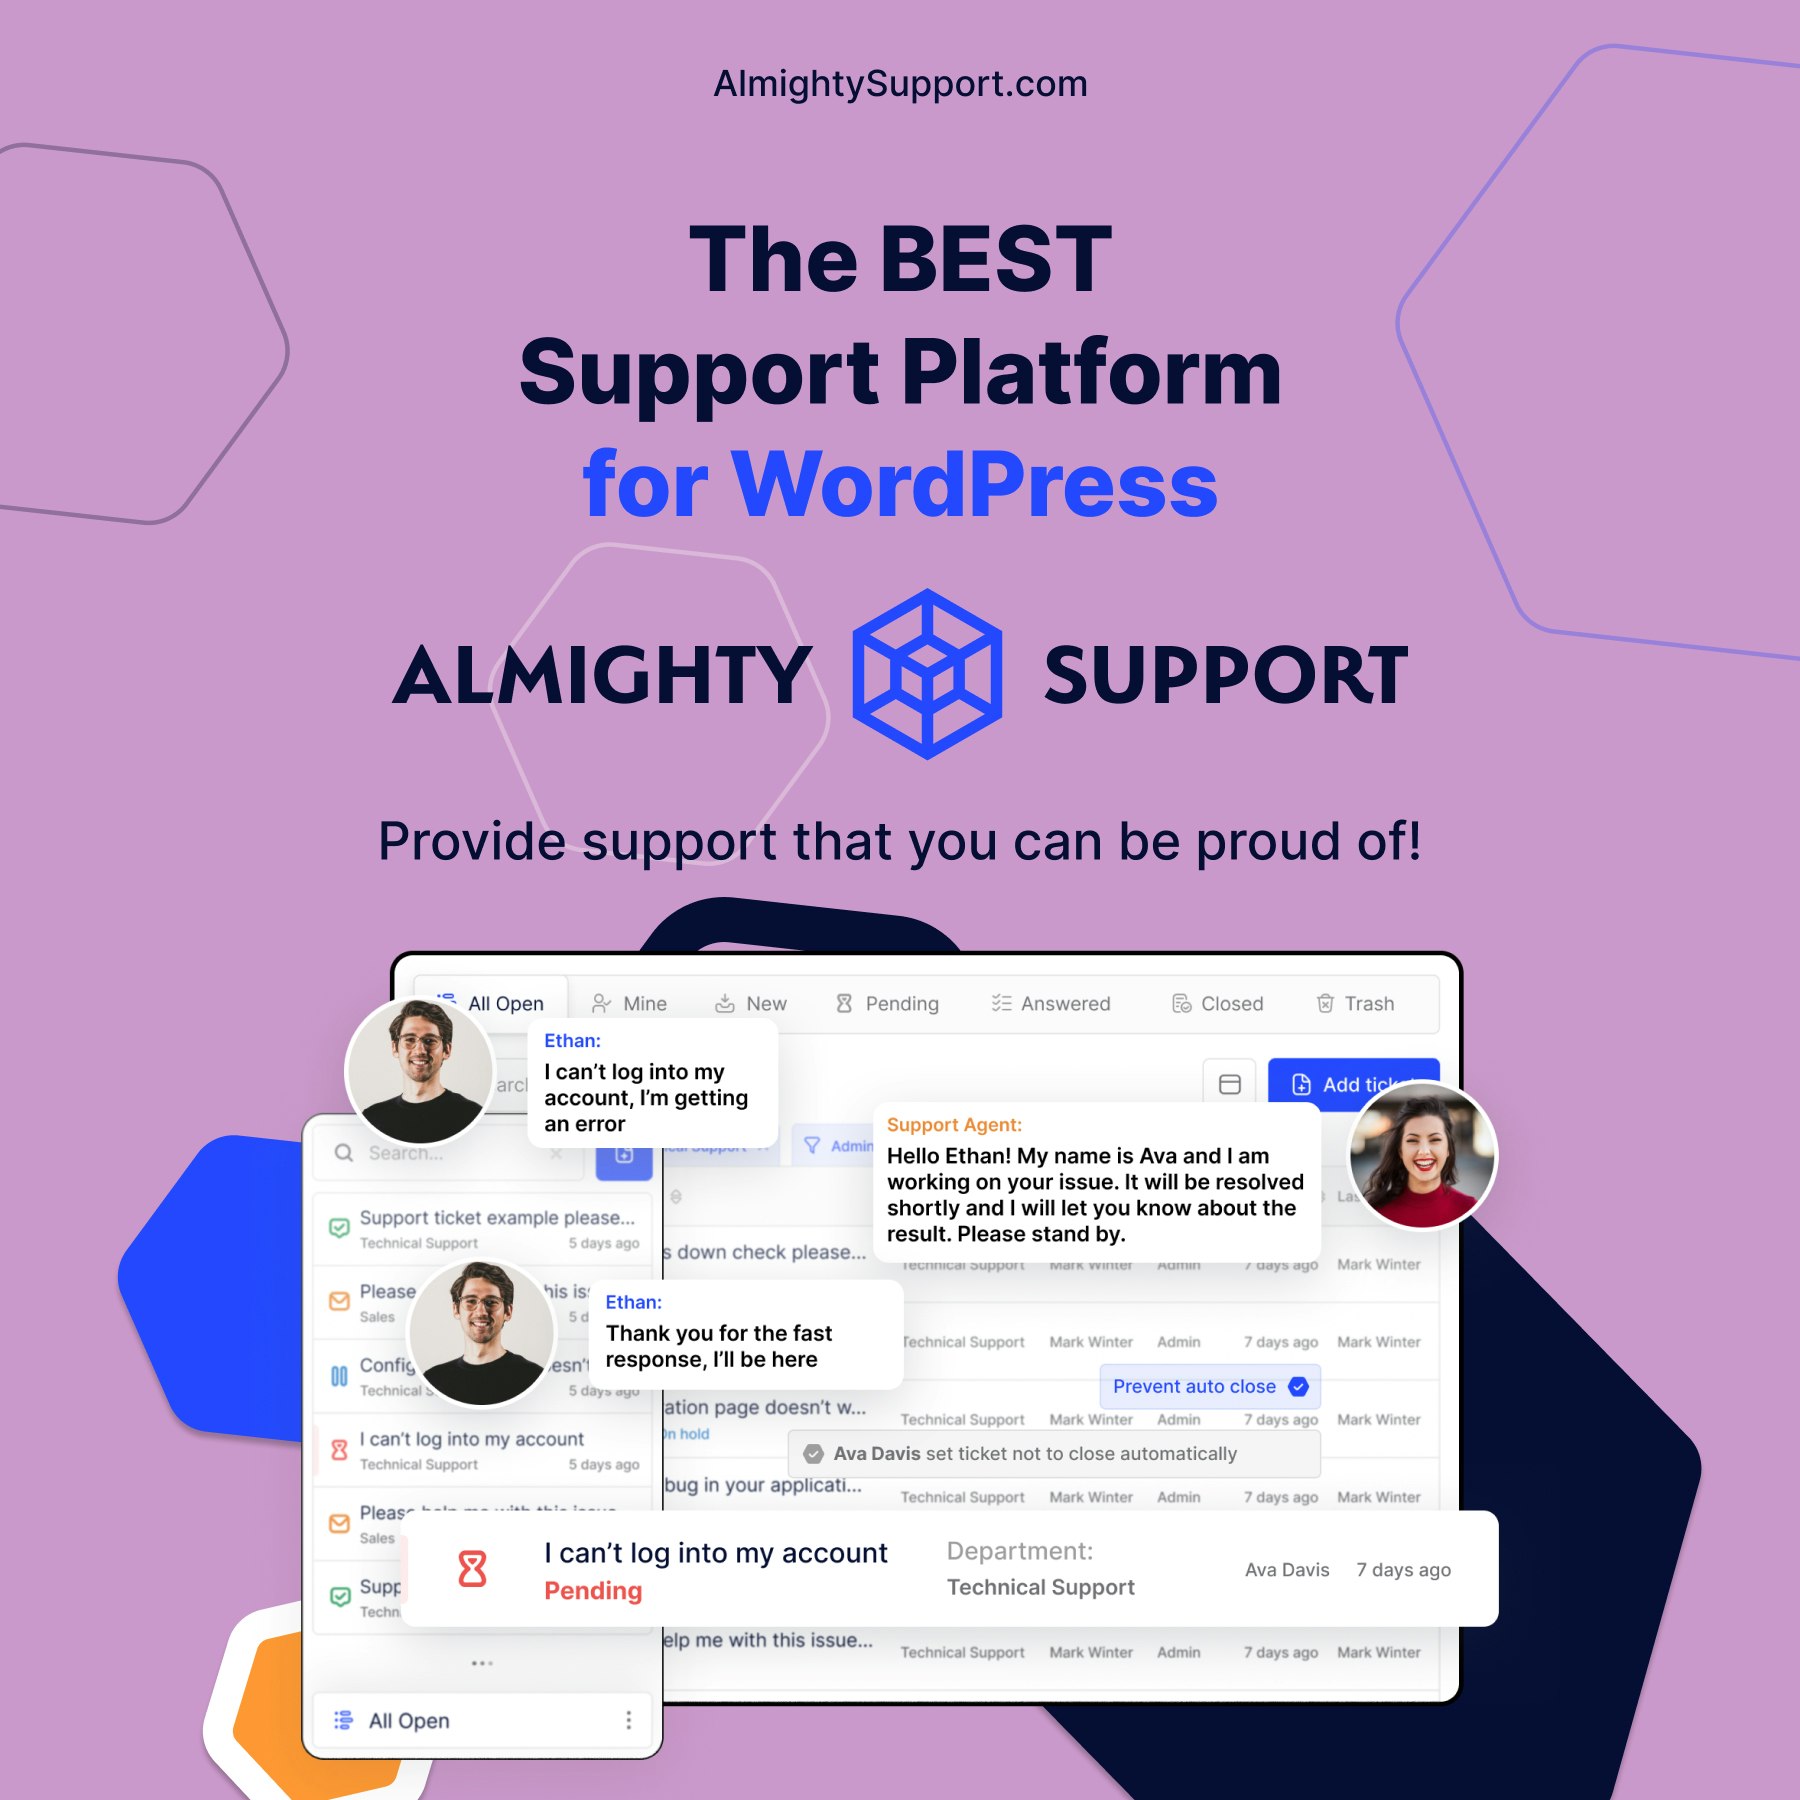 startuptile Almighty Support-Truly Almighty Client Contact & Ticket-Based Support System